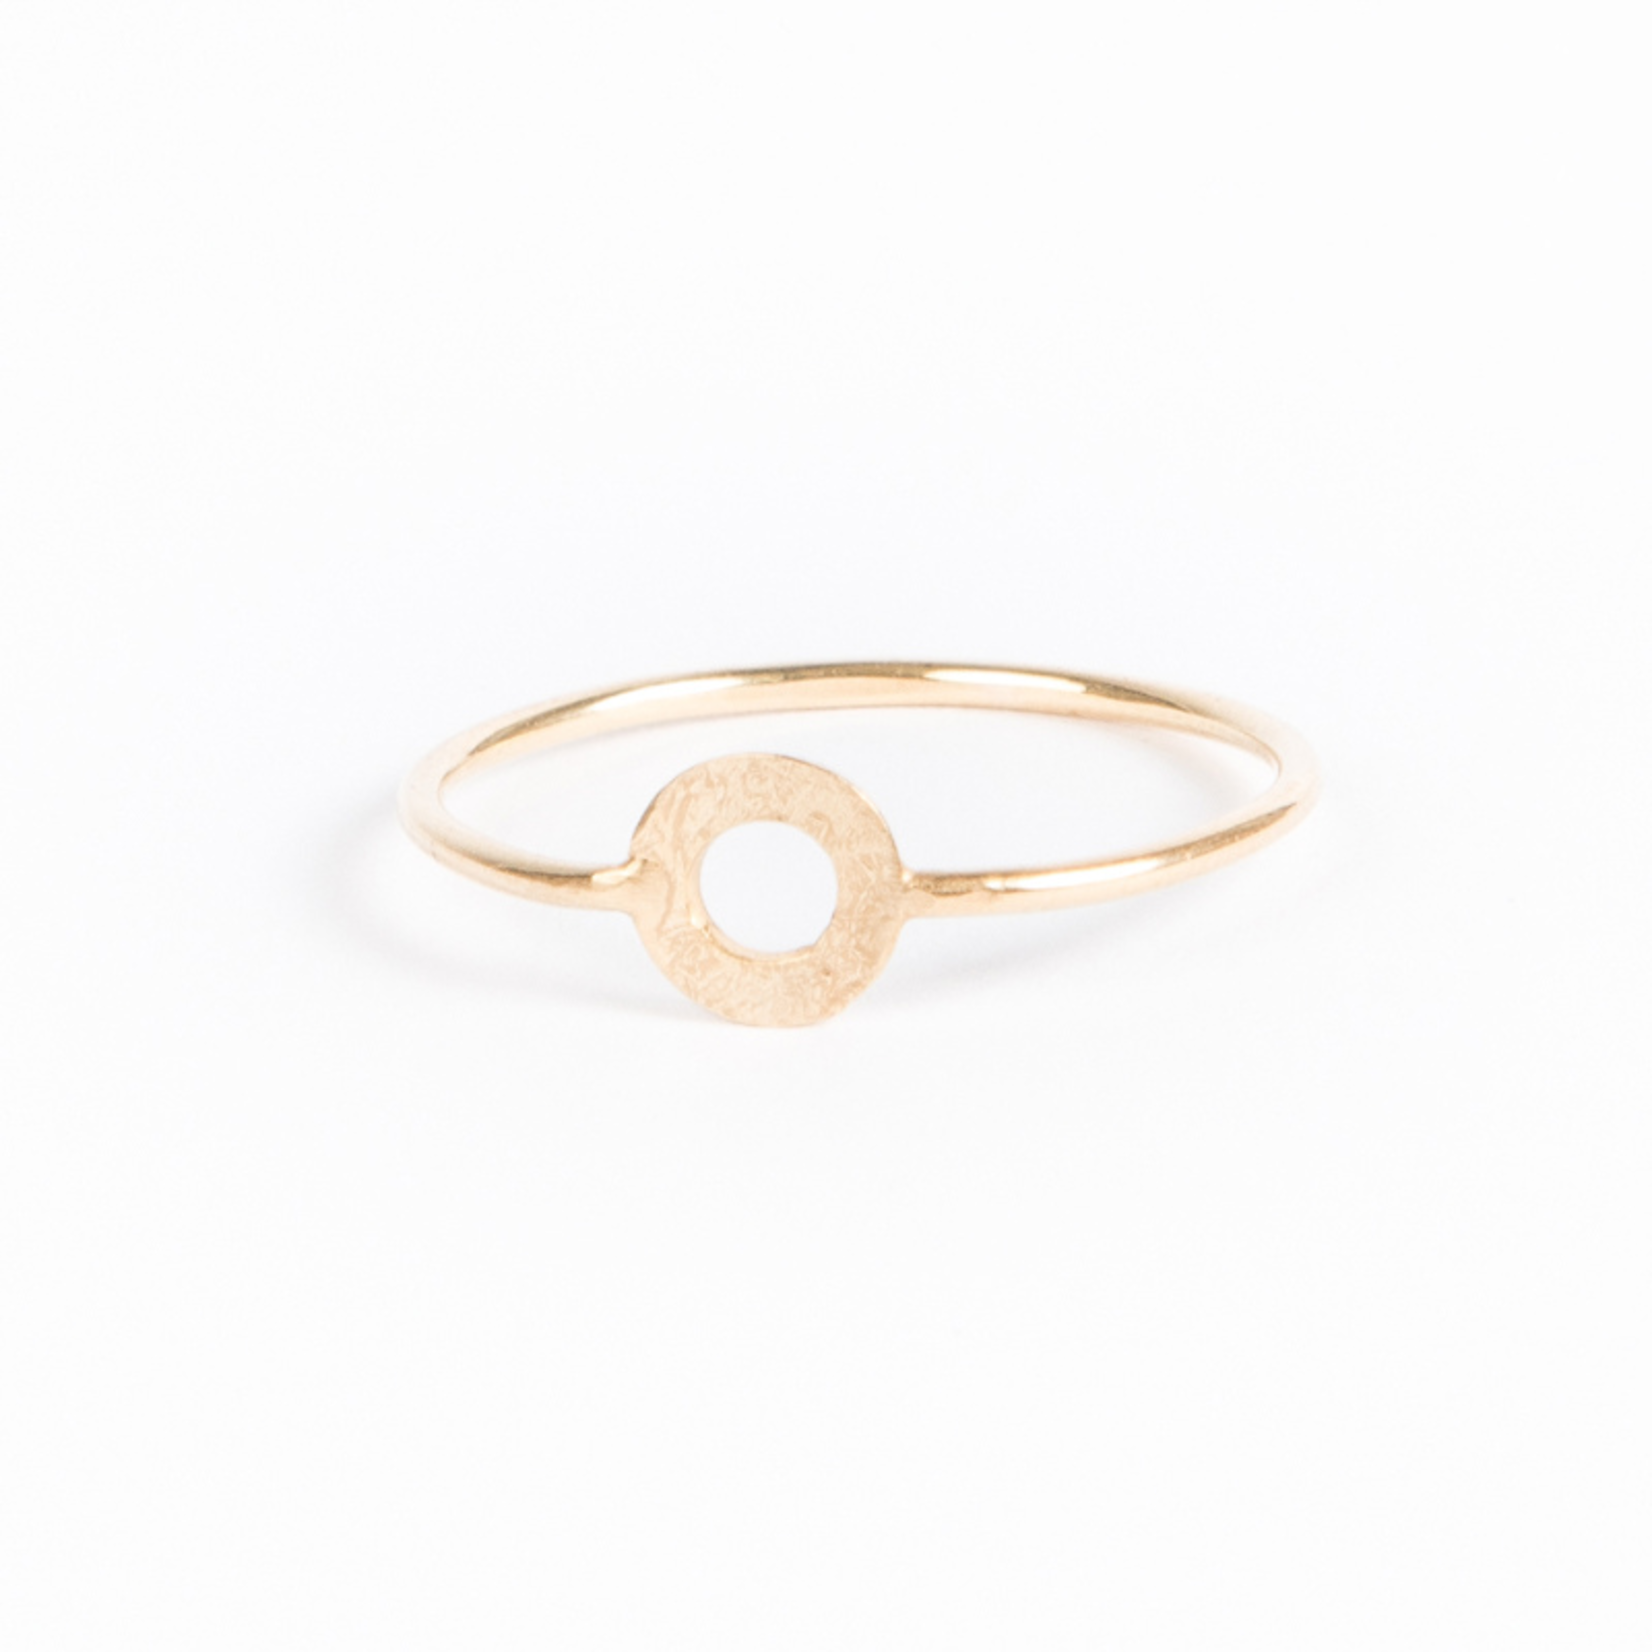 charlotte wooning charlotte wooning - ring ancient round - goud